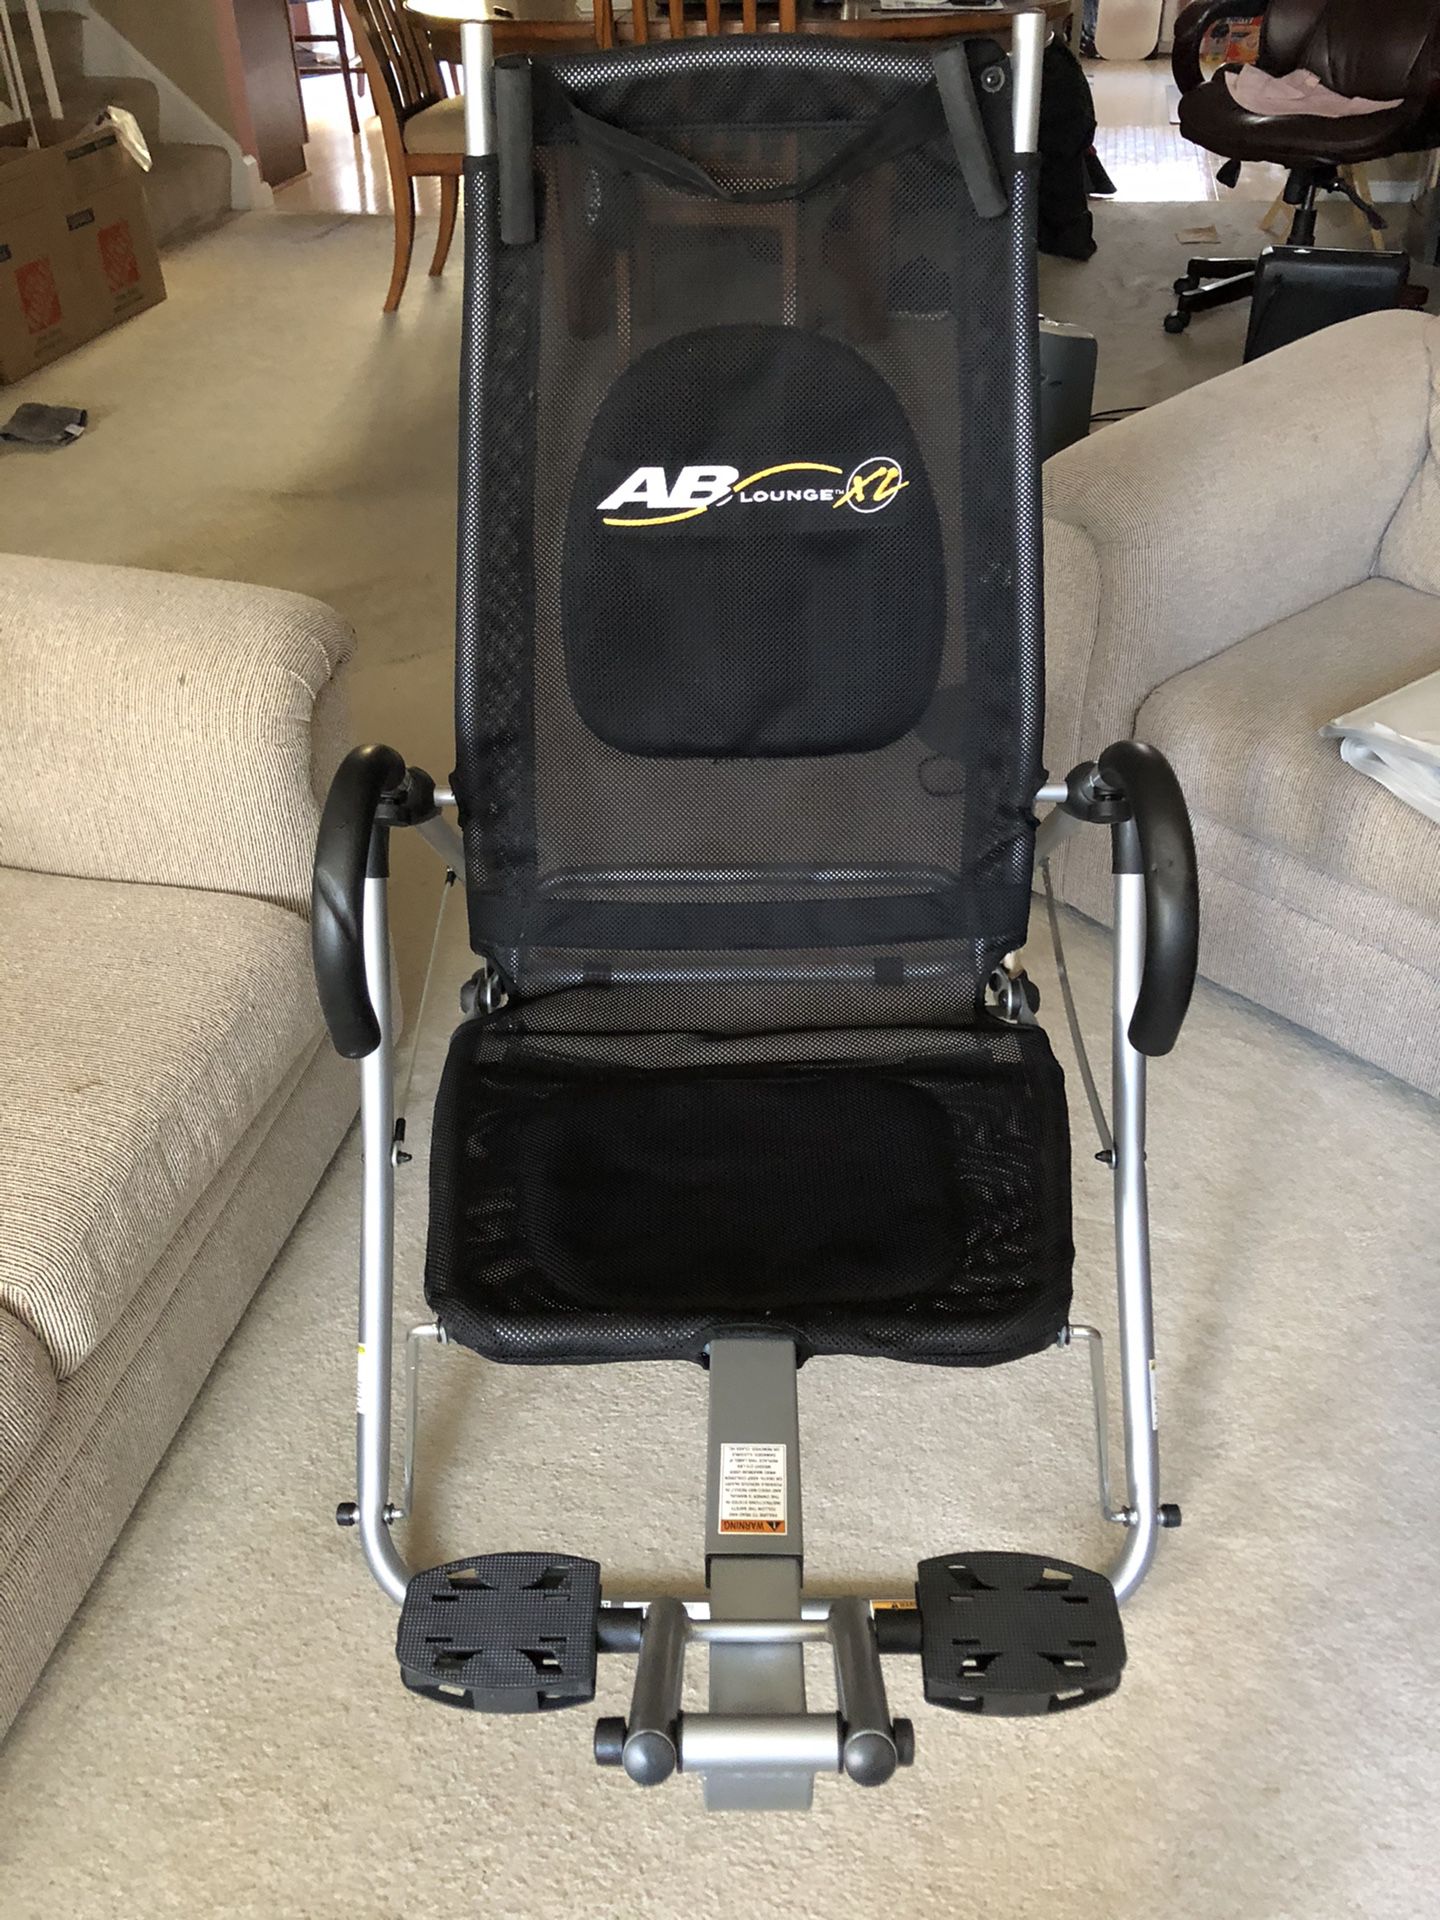 AB Lounge XL Abdominal Exercise Chair